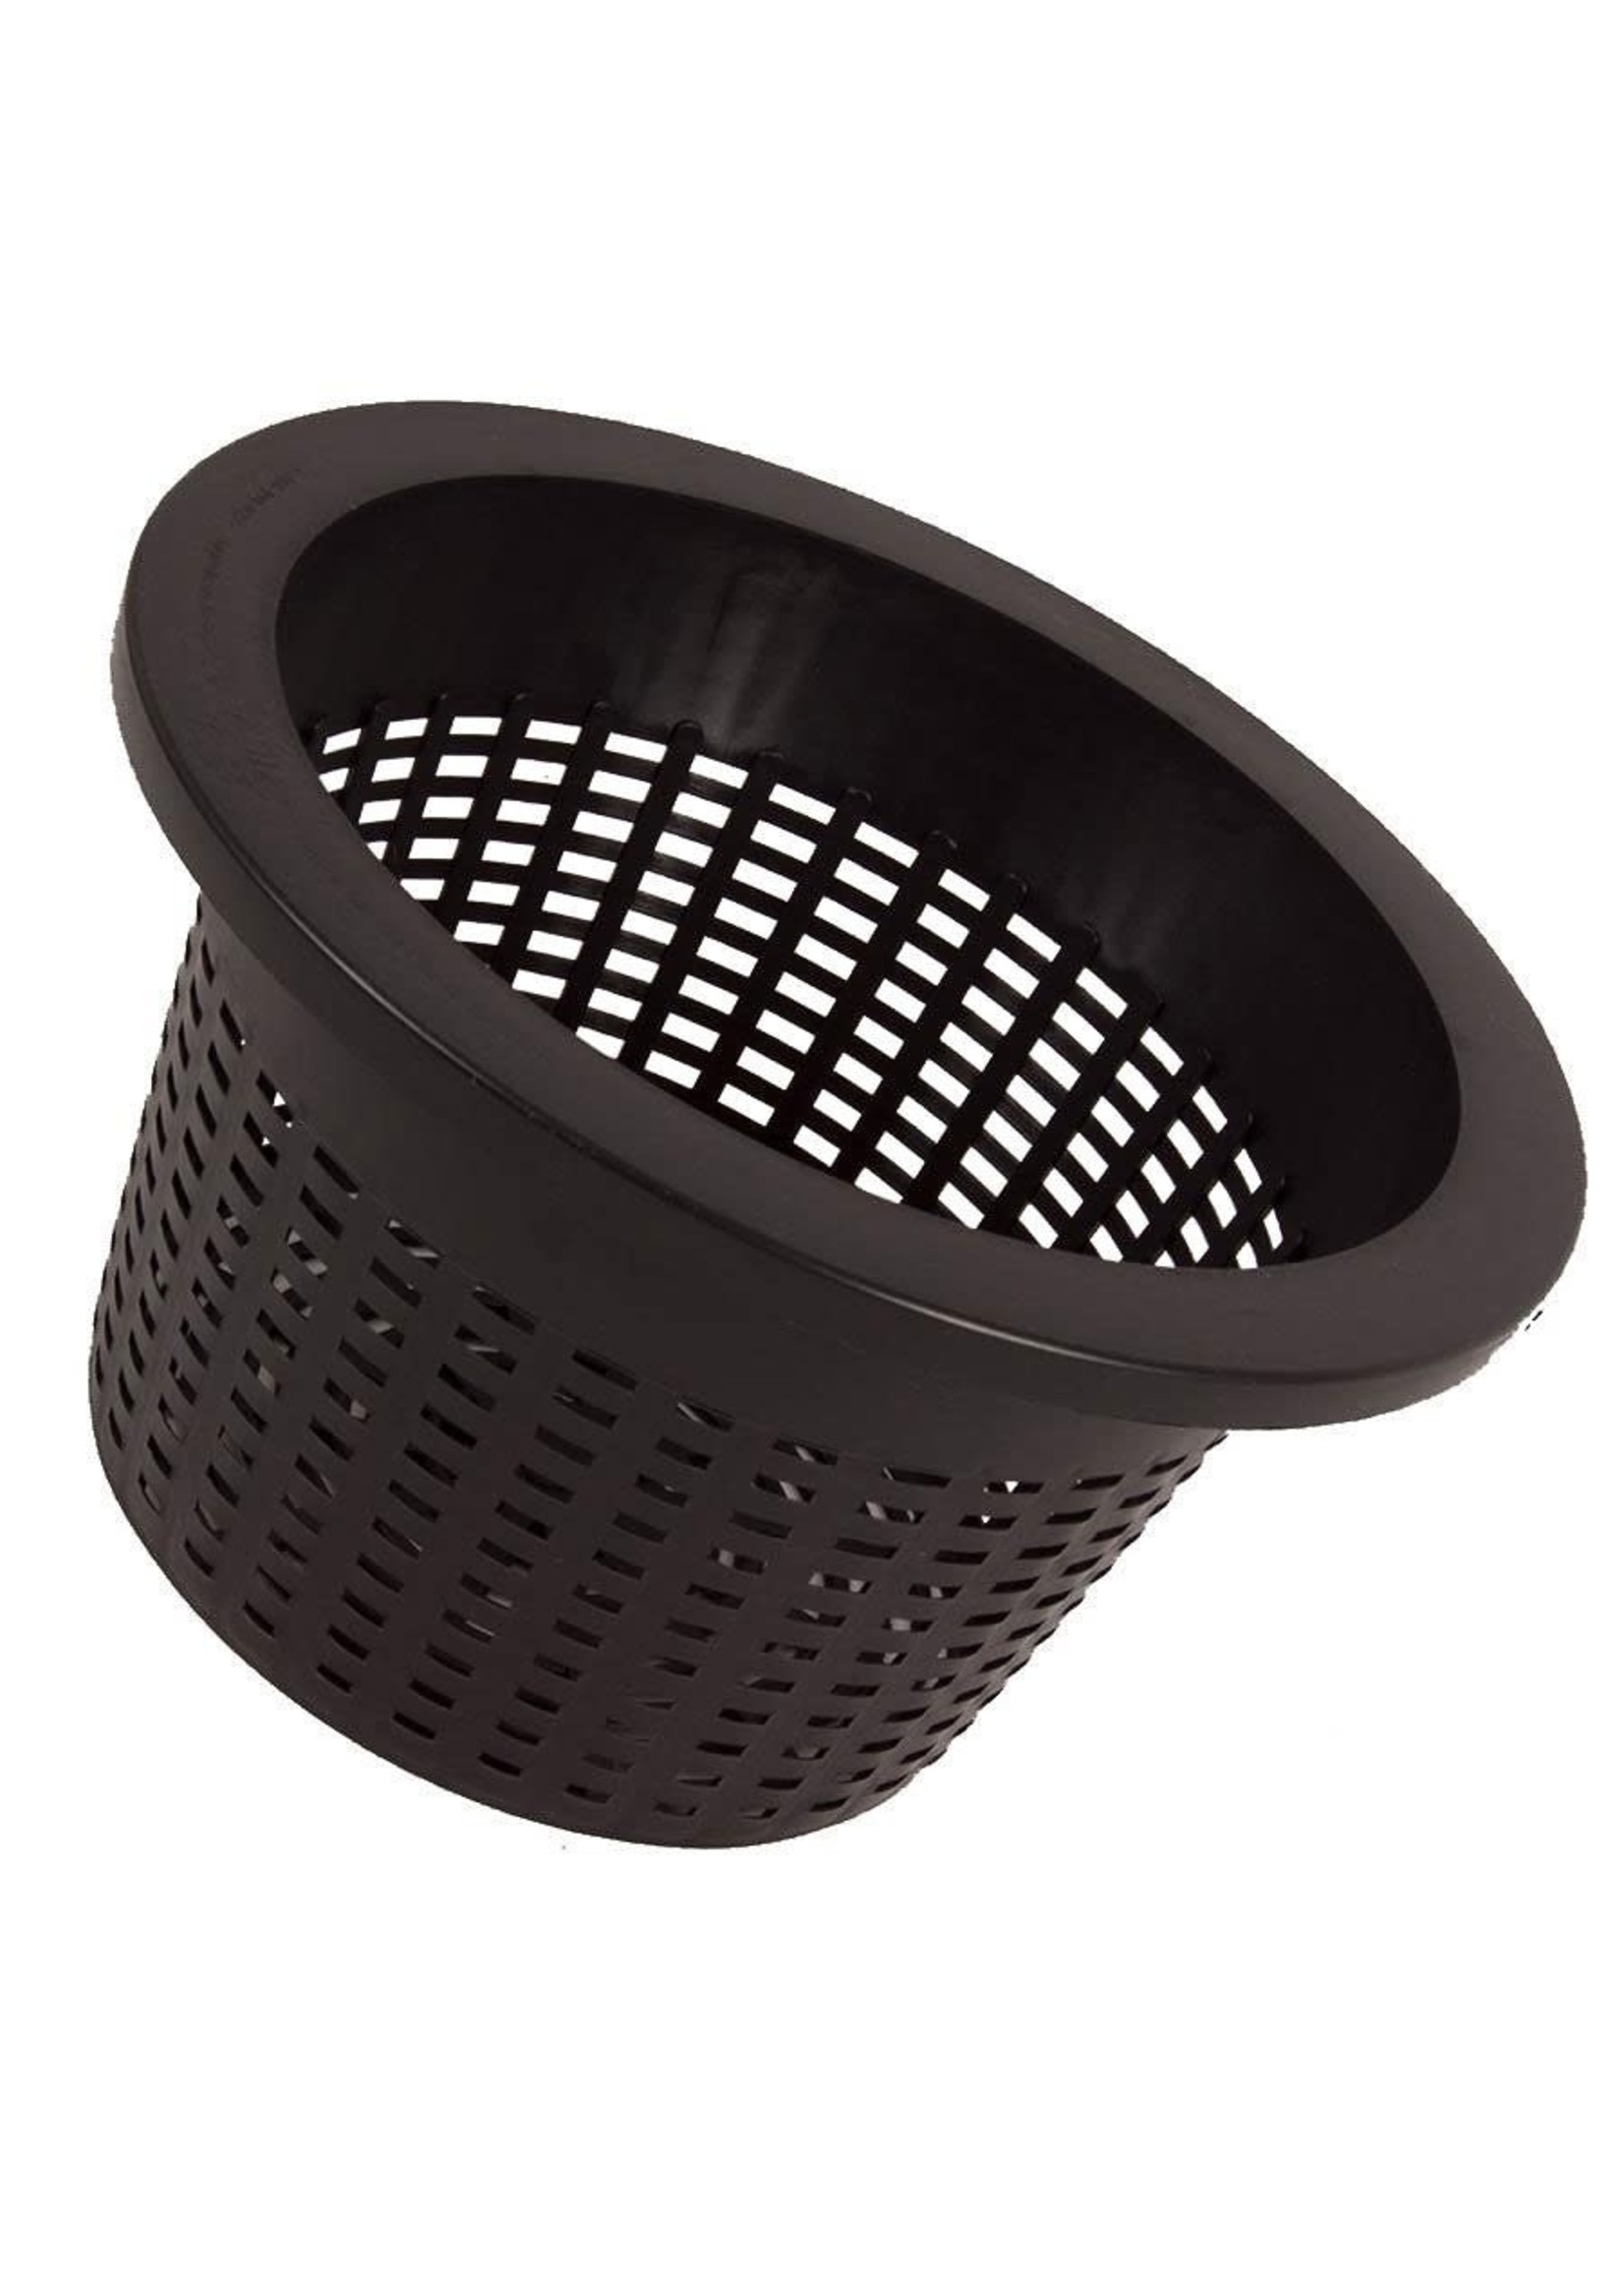 20L PAIL COVER WITH 10'' MESH BASKET